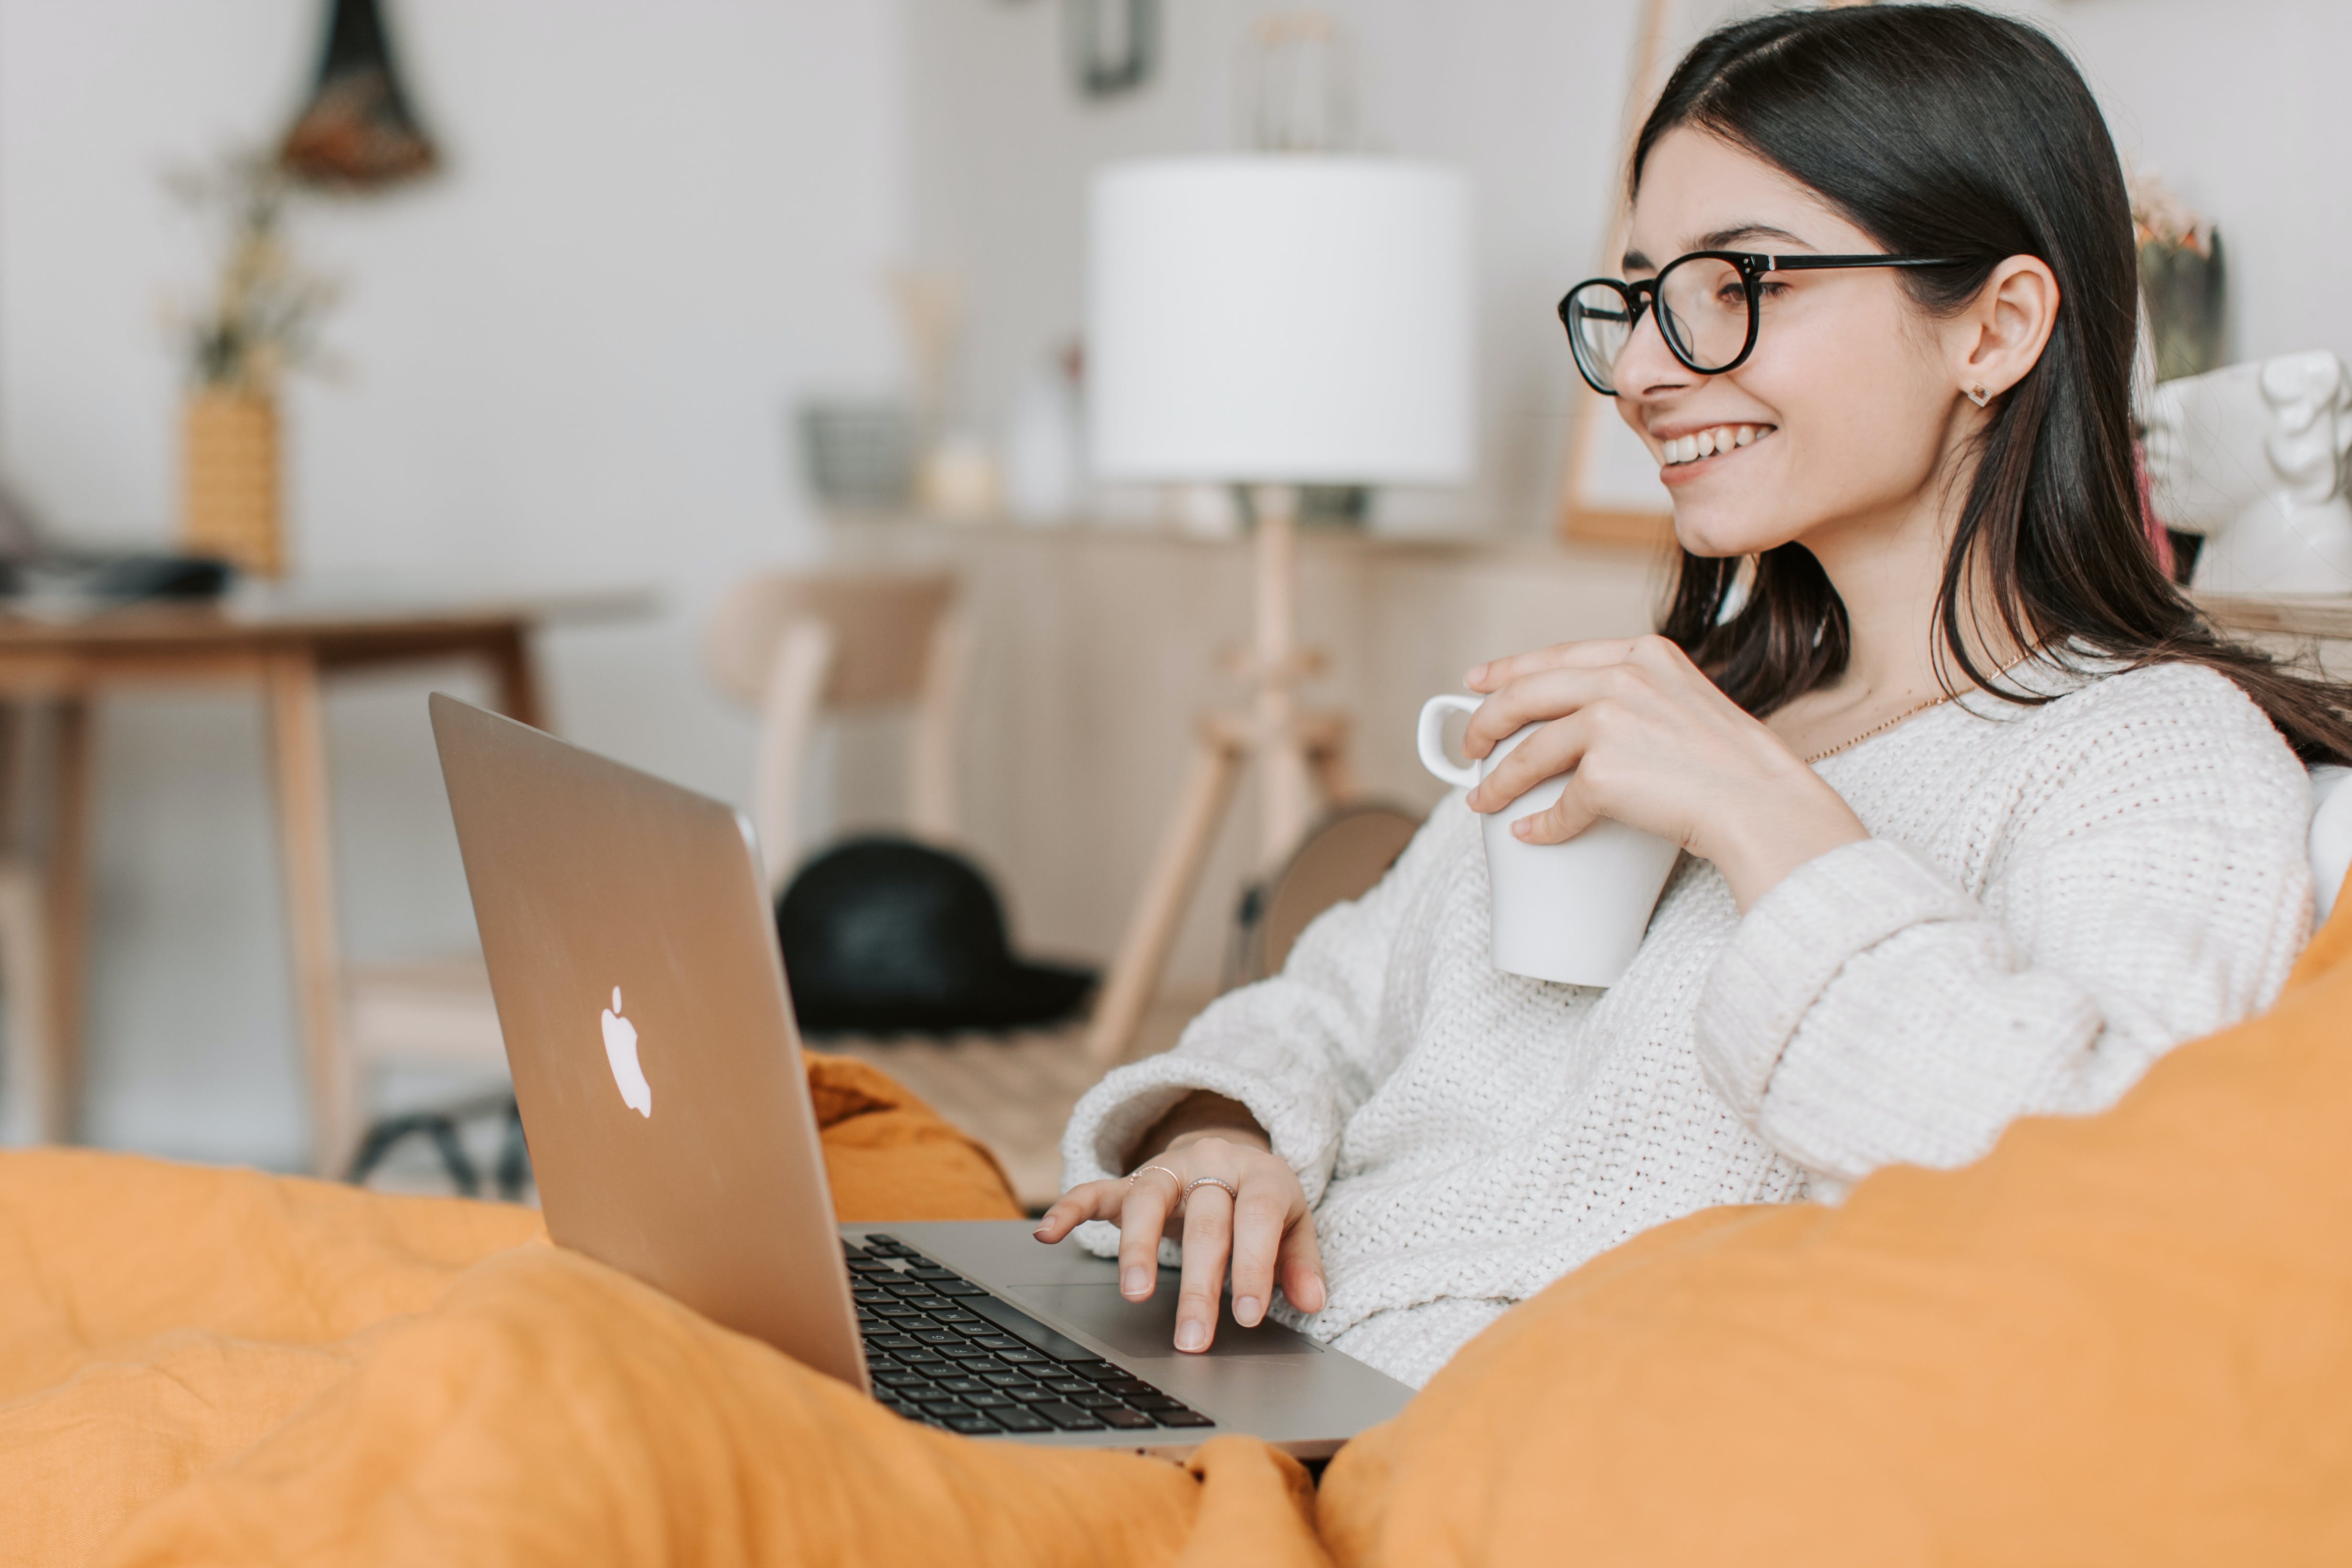 smiling woman wearing glasses holding a cup of coffee and a laptop